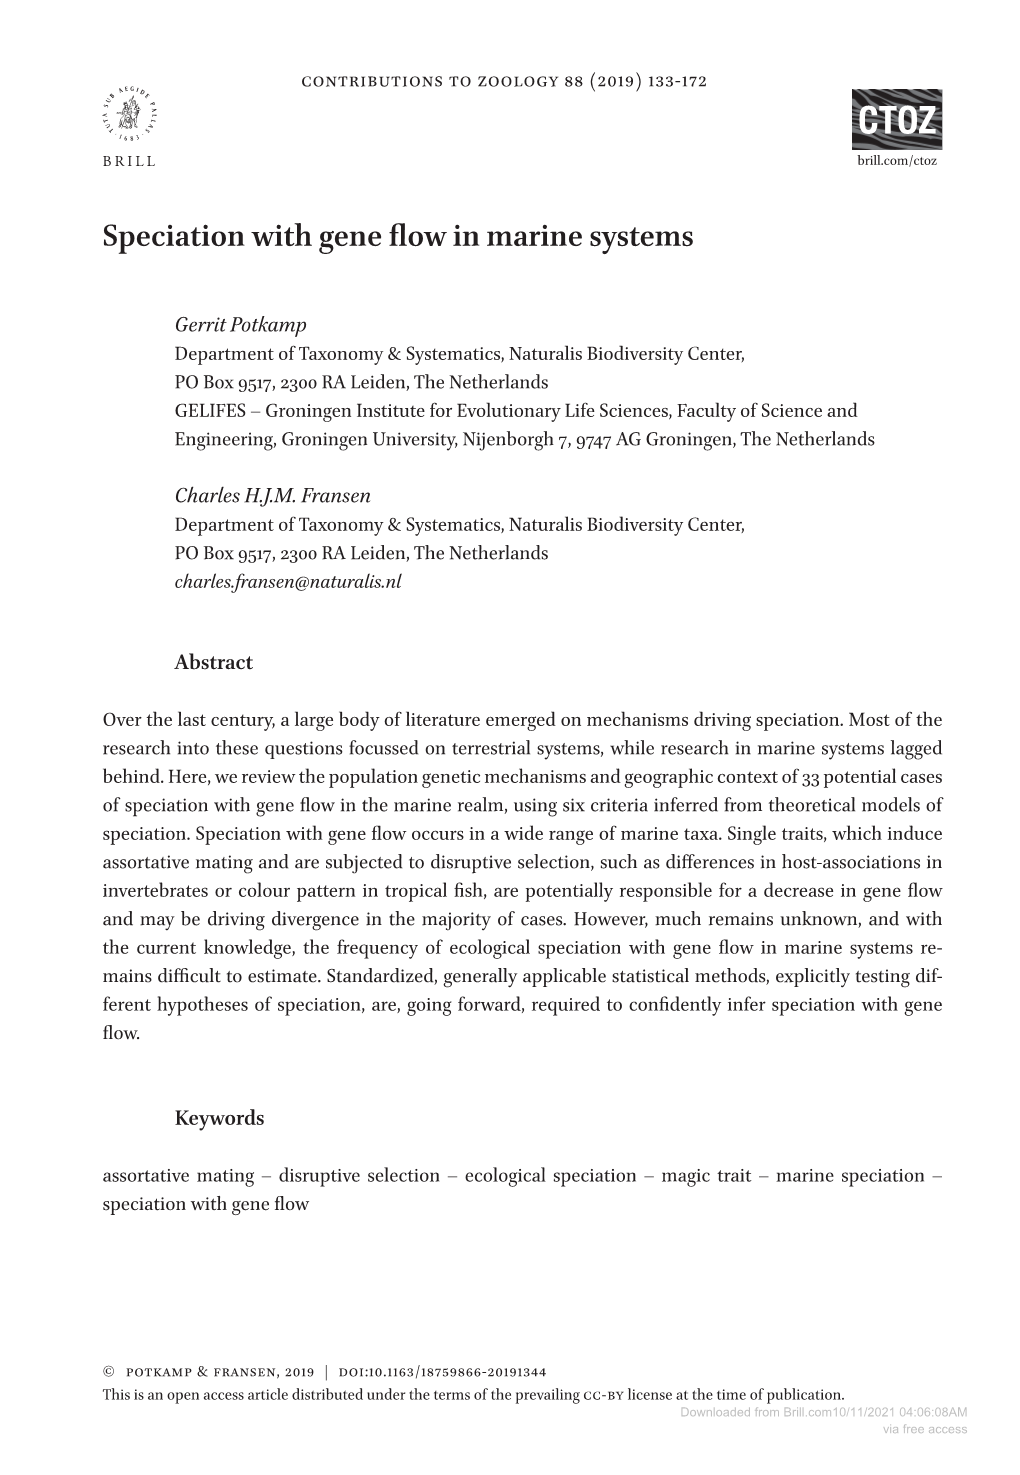 Speciation with Gene Flow in Marine Systems